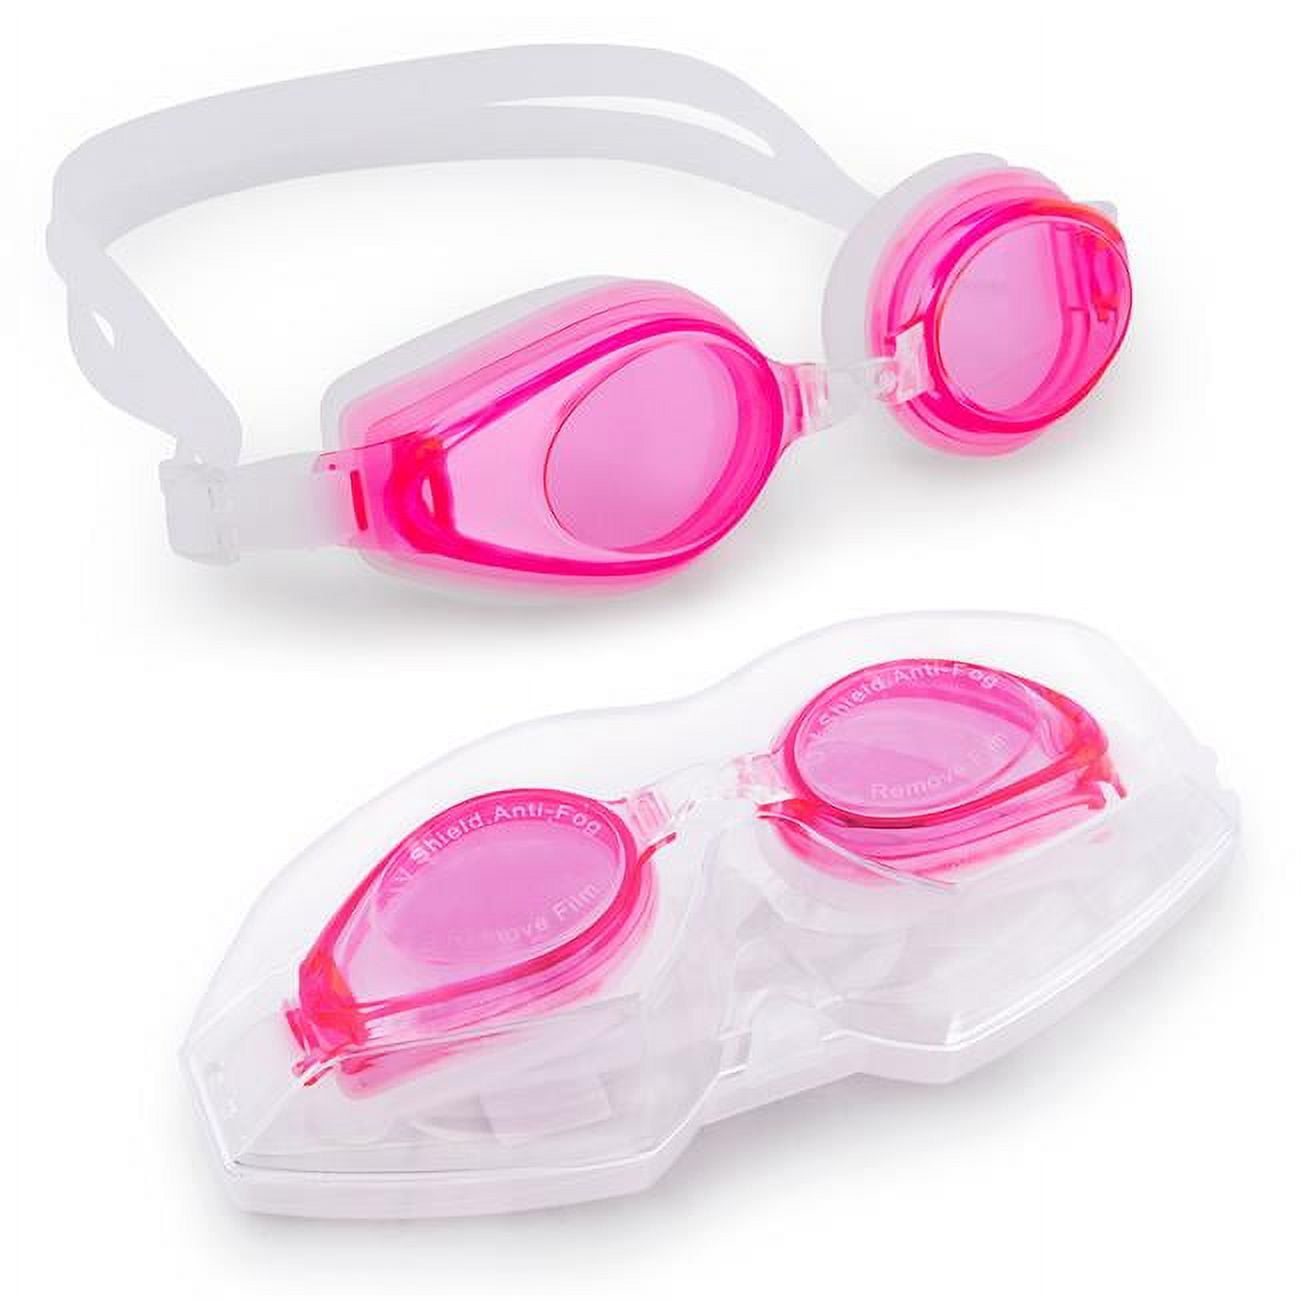 Picture of Brybelly SSWI-111 Swimming Goggles with Case, Pink - Adult